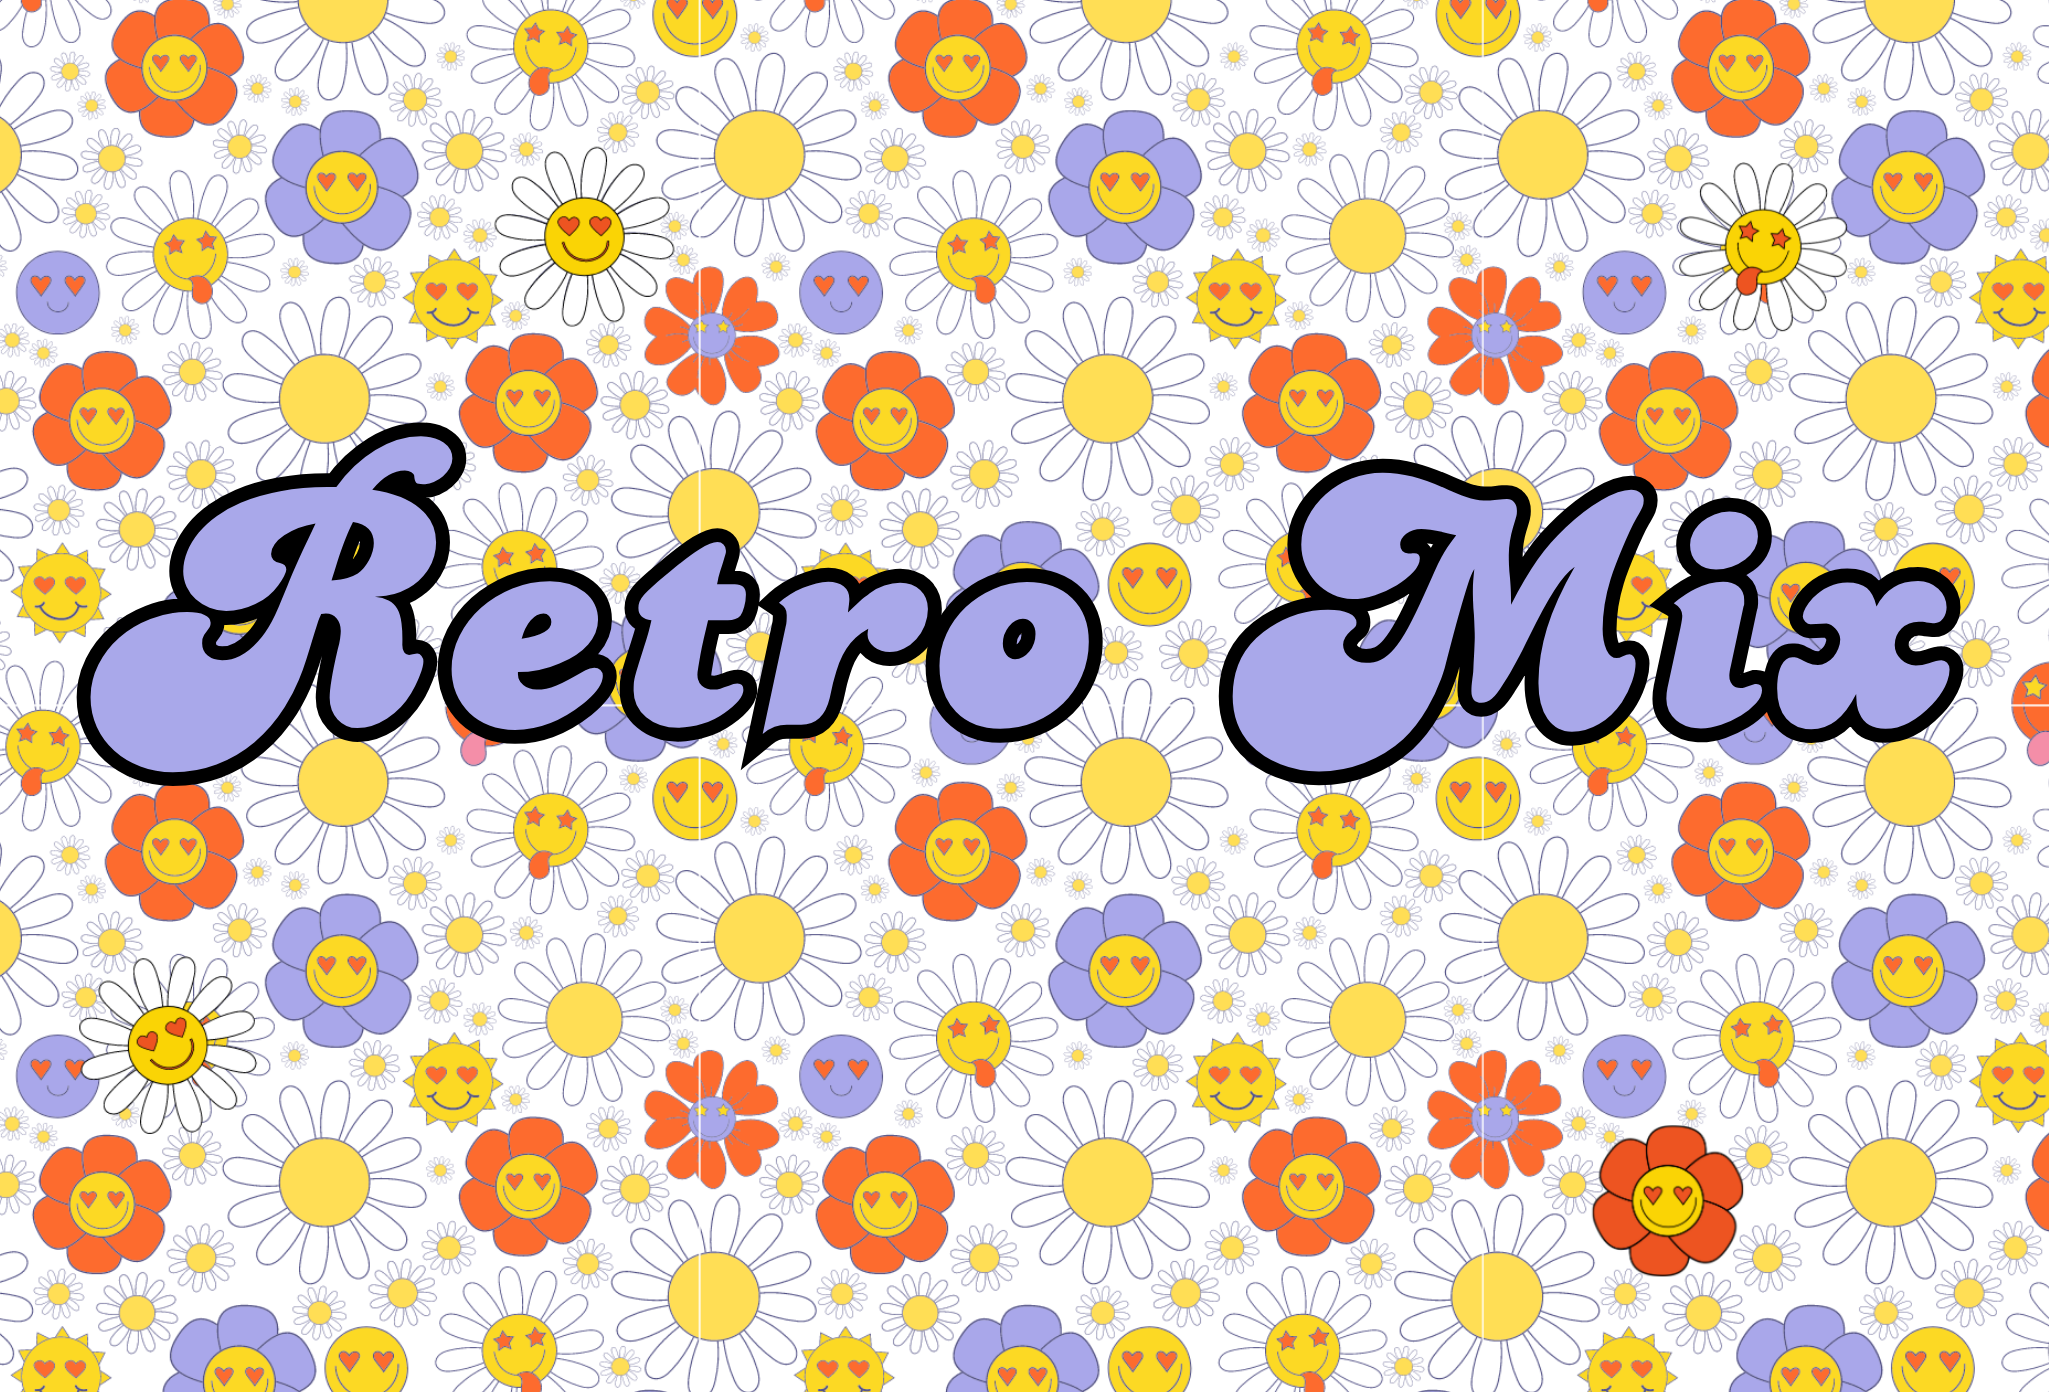 Retro flower background with the text 